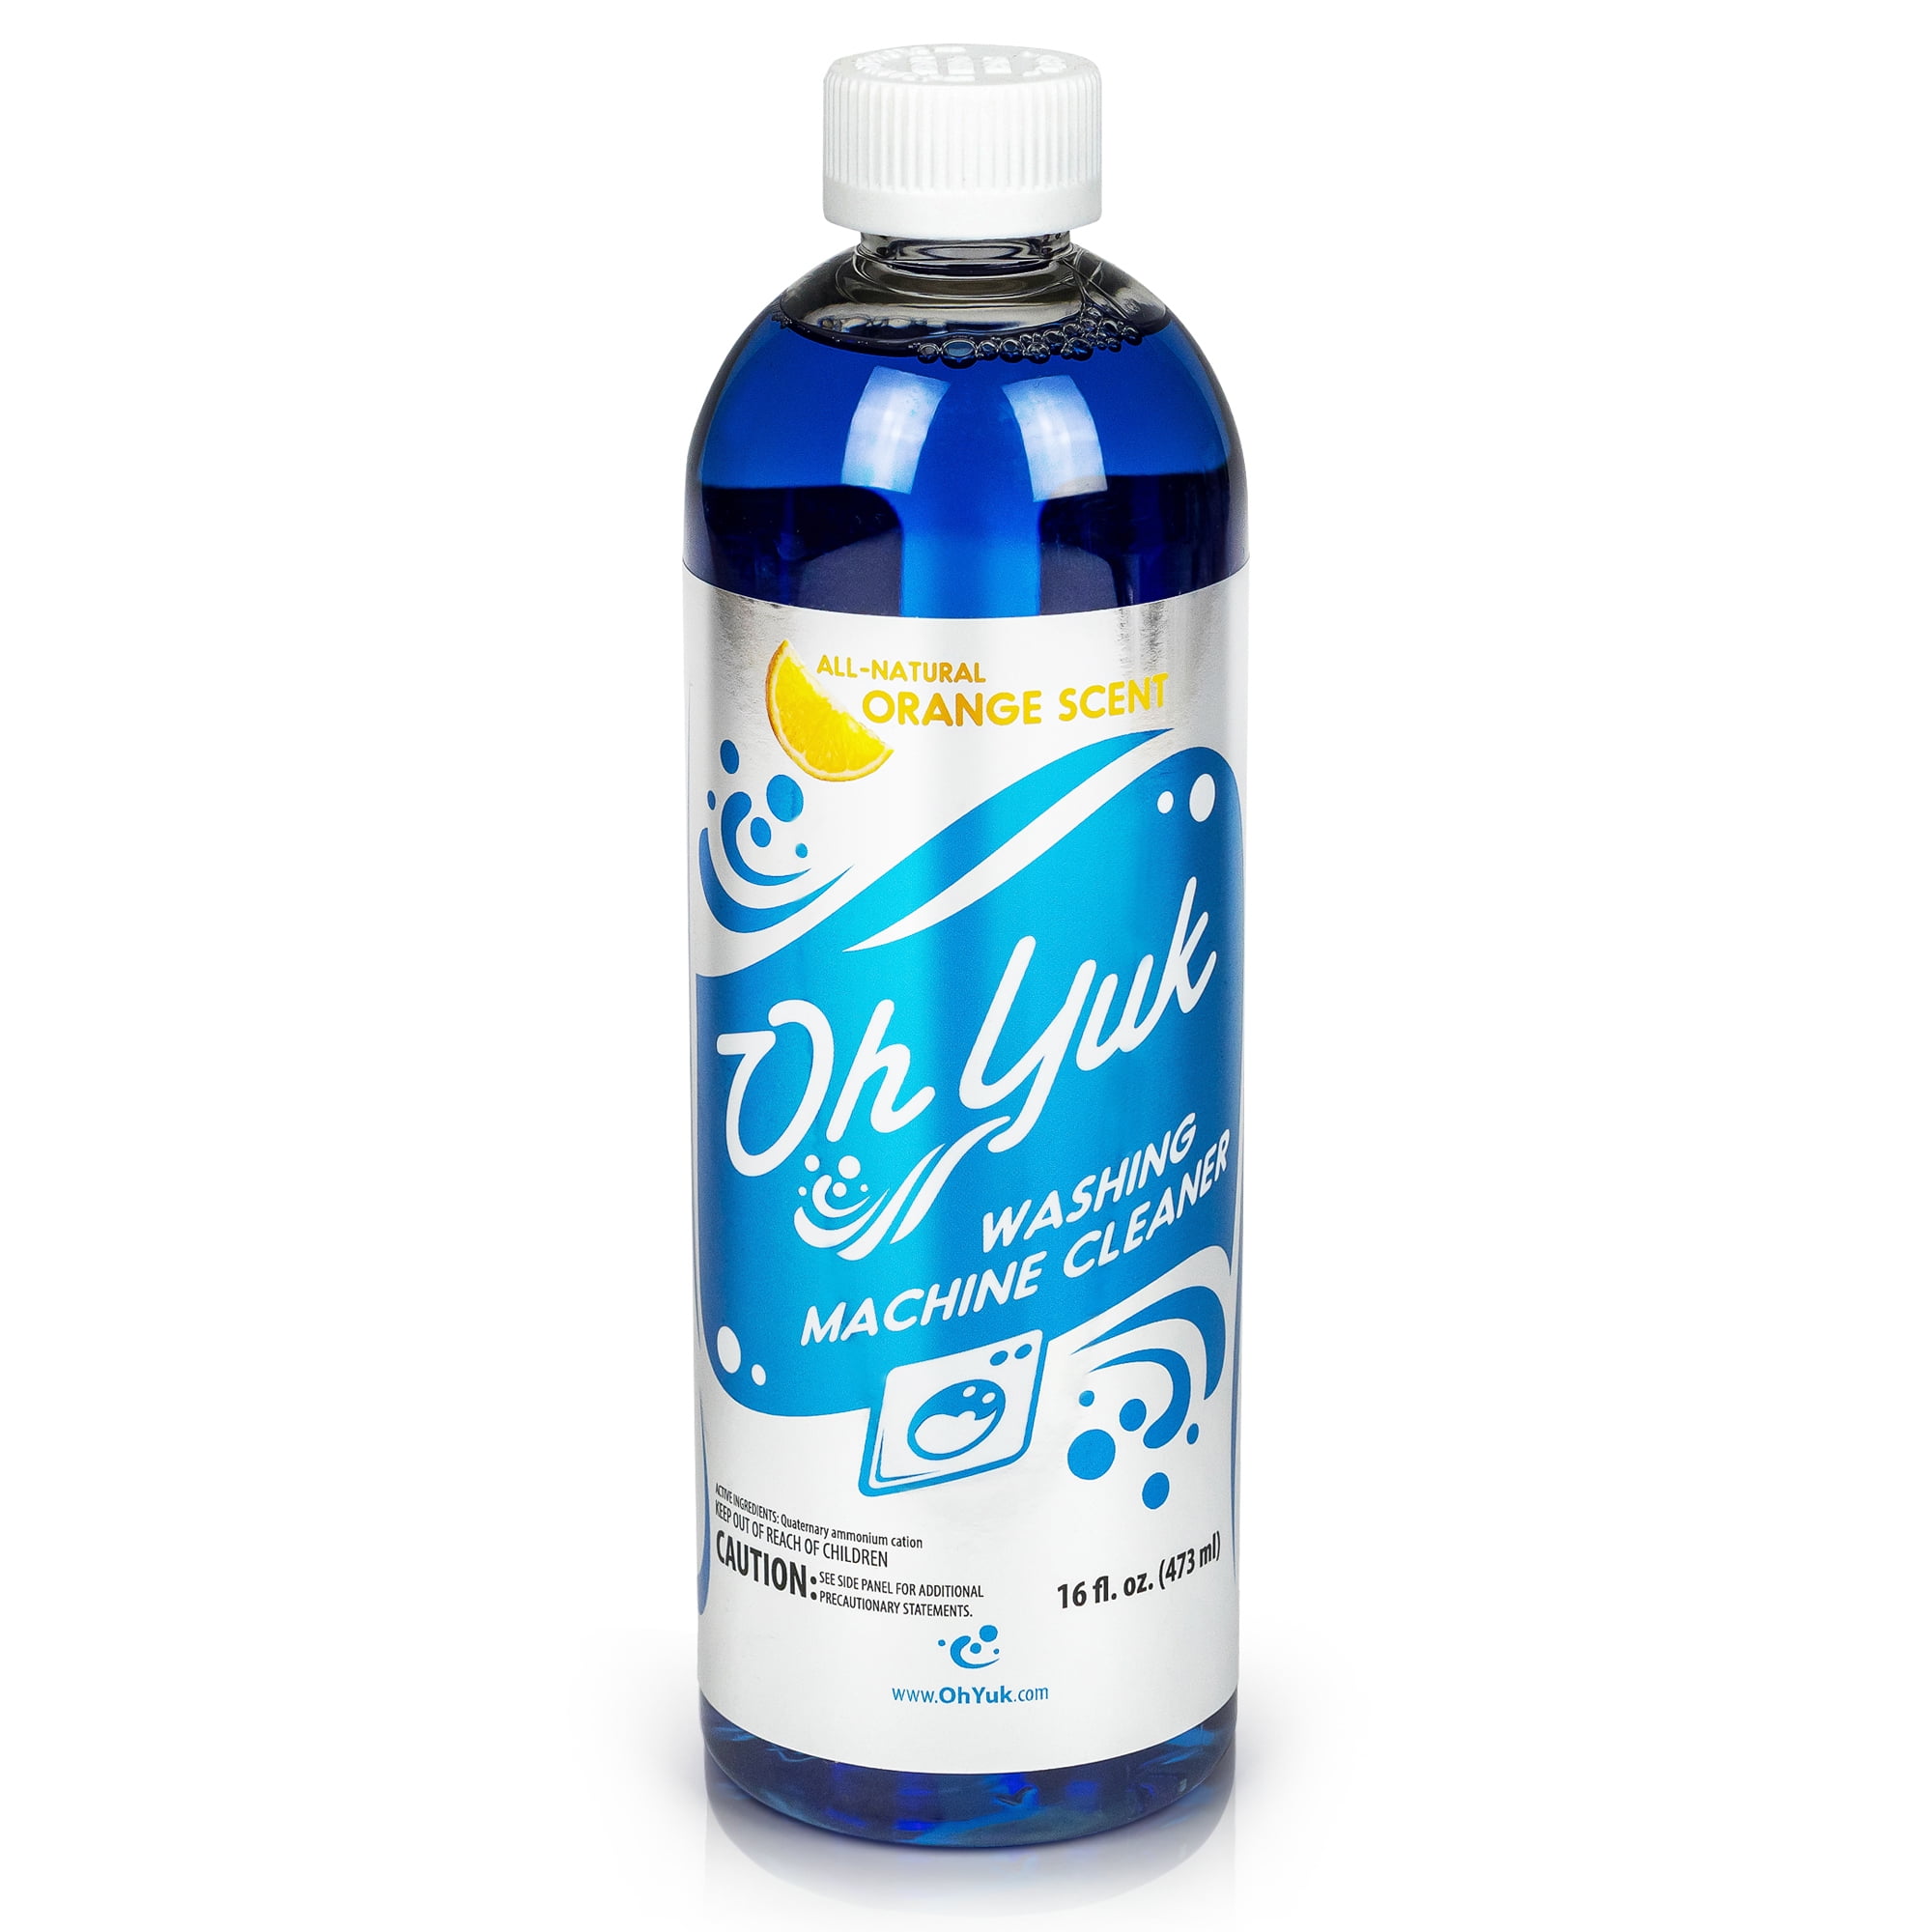 Oh Yuk Washing Machine Cleaner For All Washers (Top Load, Front Load, HE  and Non-HE), Natural Citrus Fragrance, Four Cleanings Per Bottle, Septic